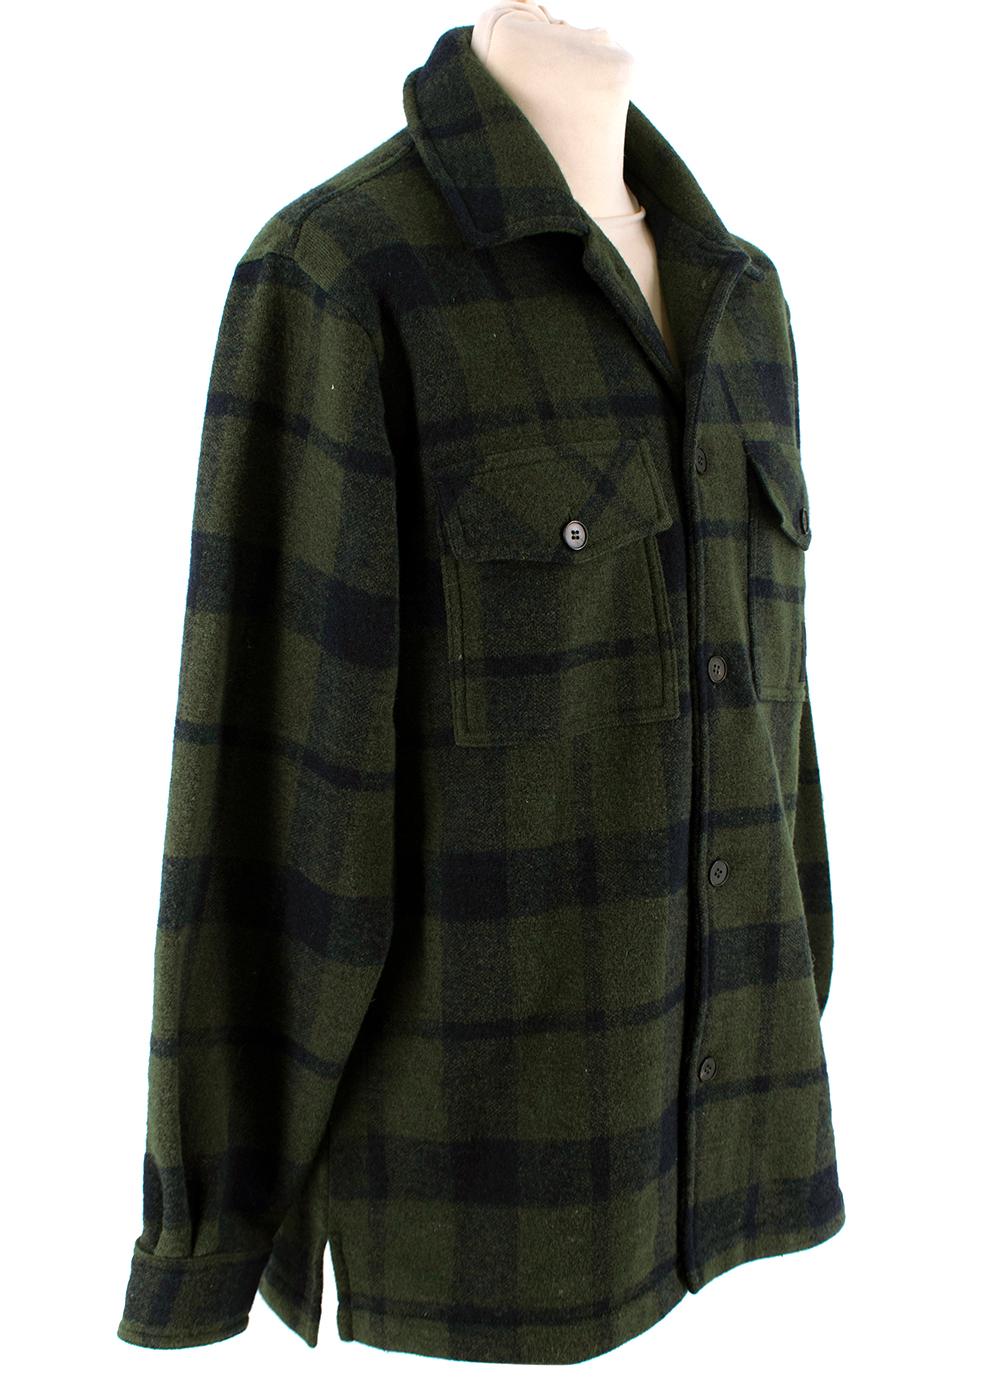 MCQ Green & Navy Plaid Wool Flannel Overshirt

- Soft handle wool flannel with a slight stretch
- Dark earthy tones of blue and green
- Classic collar, button front
- Wear layered over a t-shirt or light layer

Materials
80% Wool 
20% Polyester